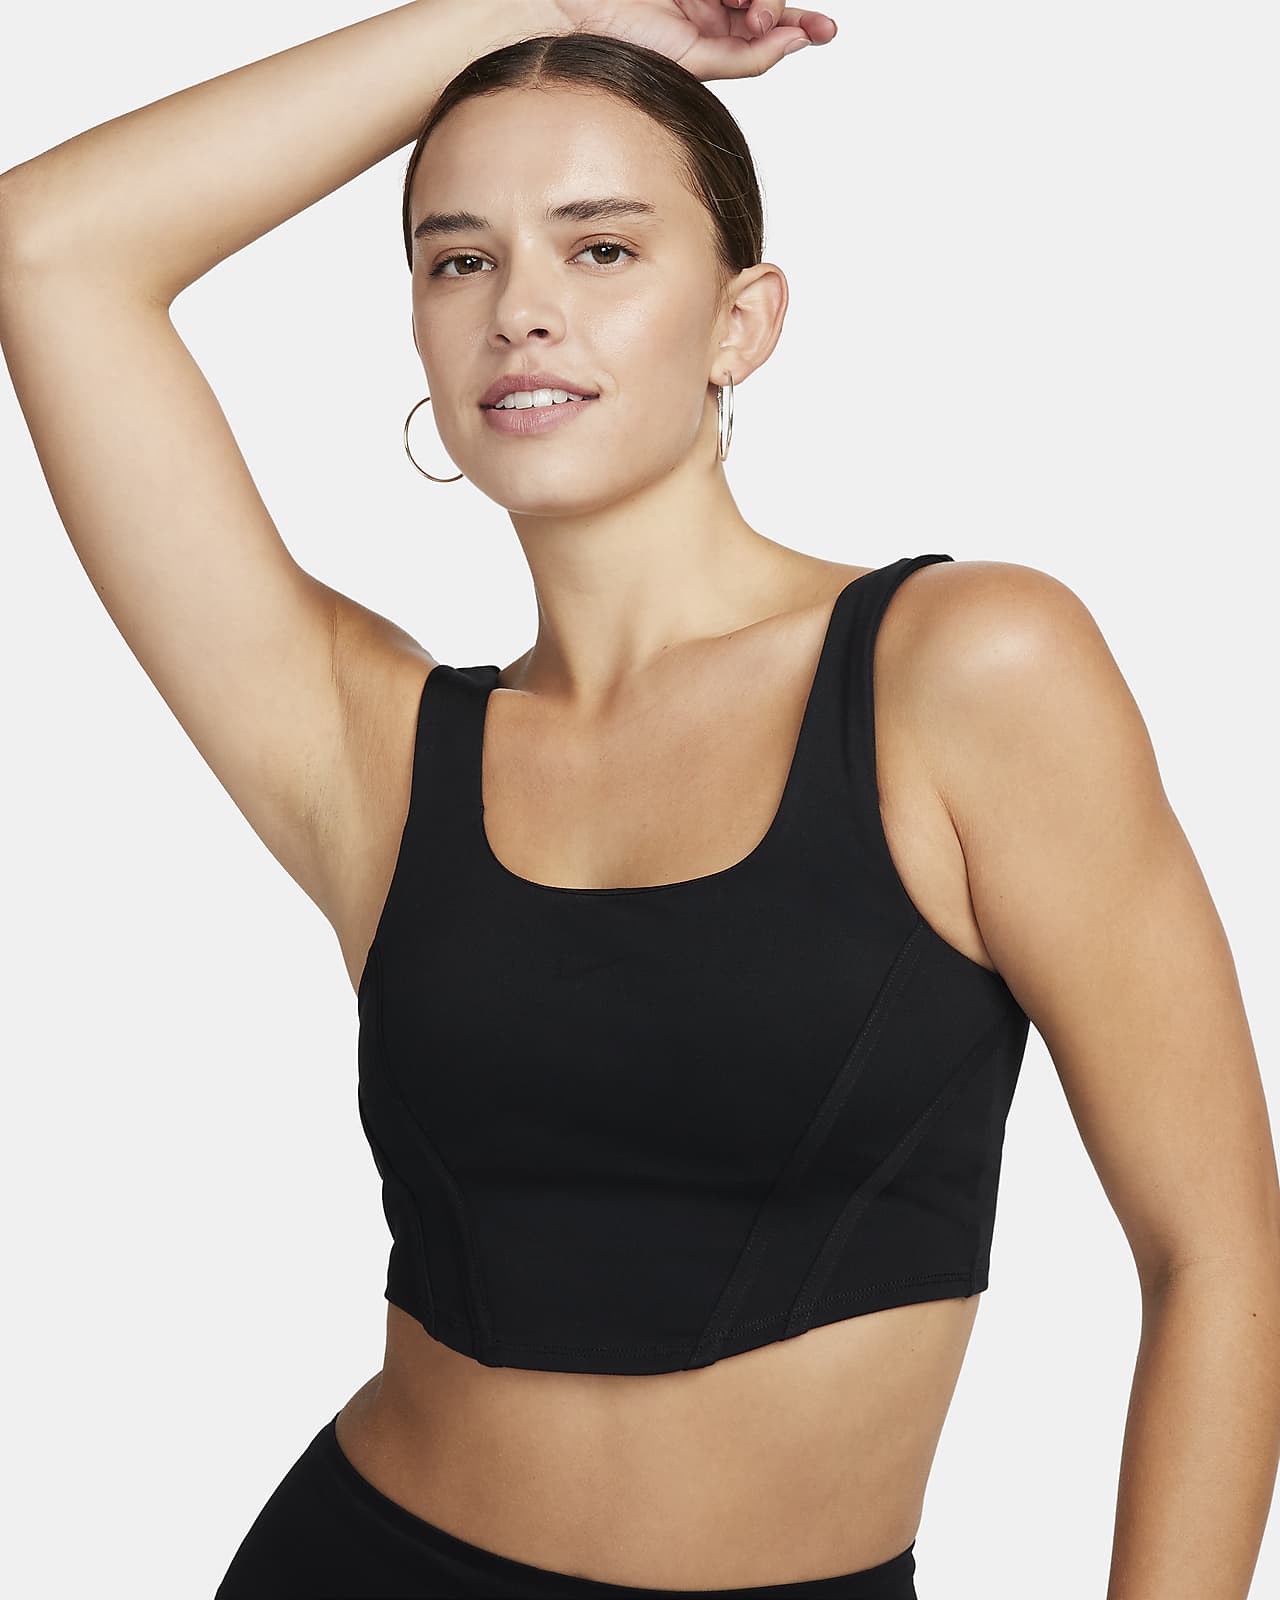 https://static.nike.com/a/images/t_PDP_1280_v1/f_auto,q_auto:eco/5229eb24-a46b-4a55-ab8f-7d2af355f01b/sportswear-womens-light-support-padded-corset-bra-367dmr.png